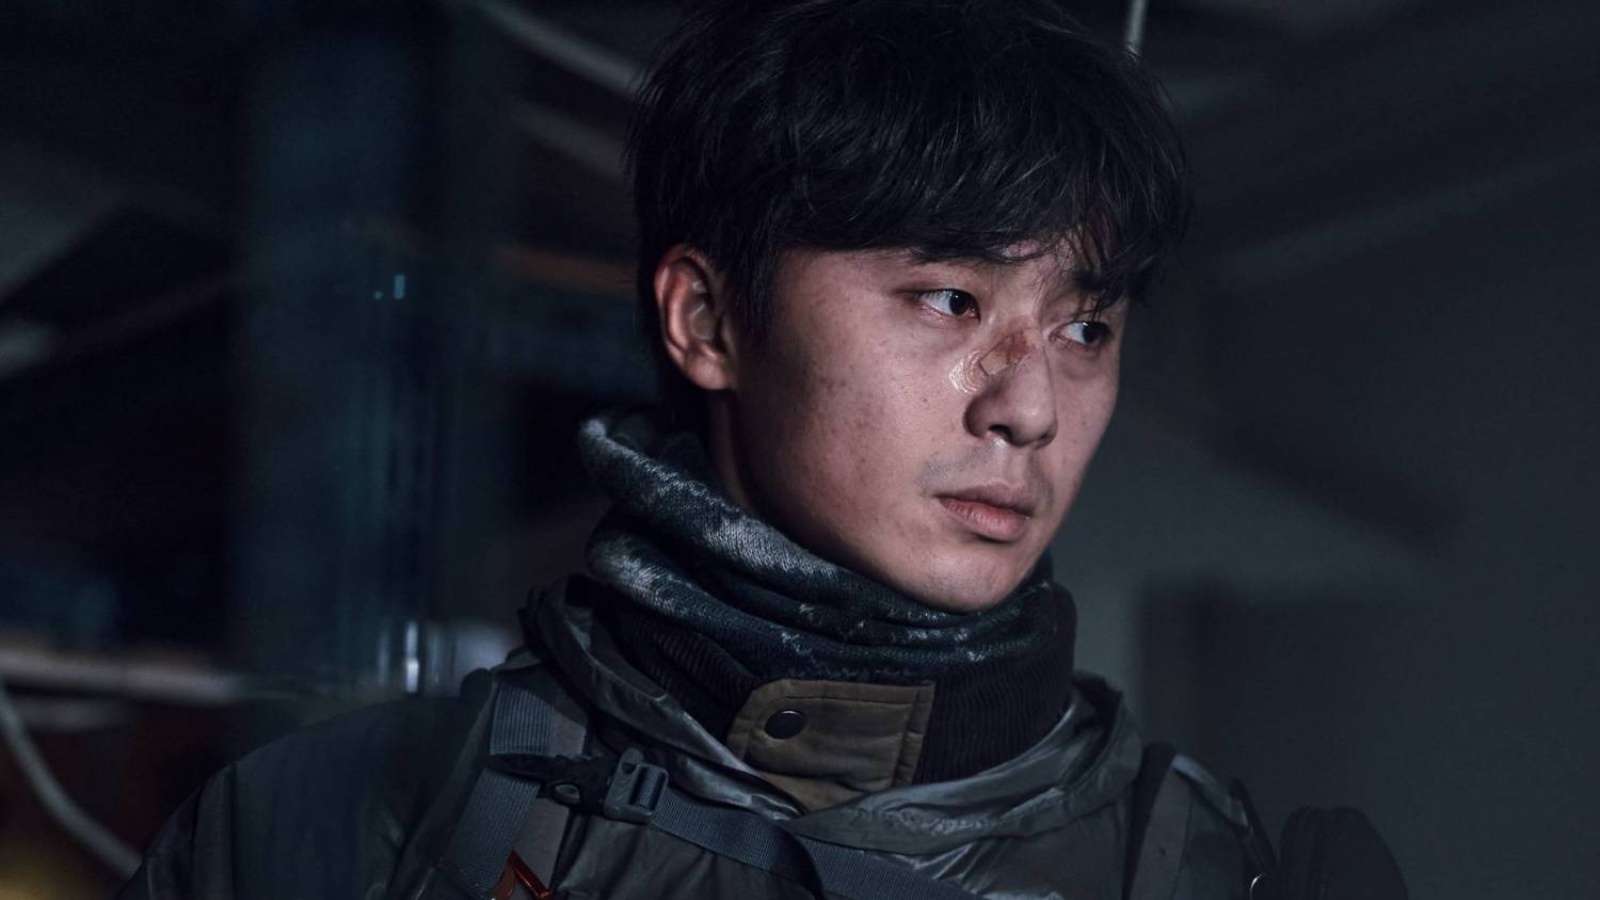 Park Seo-joon stars as Min-seong in the disaster-thriller movie Concrete Utopia.